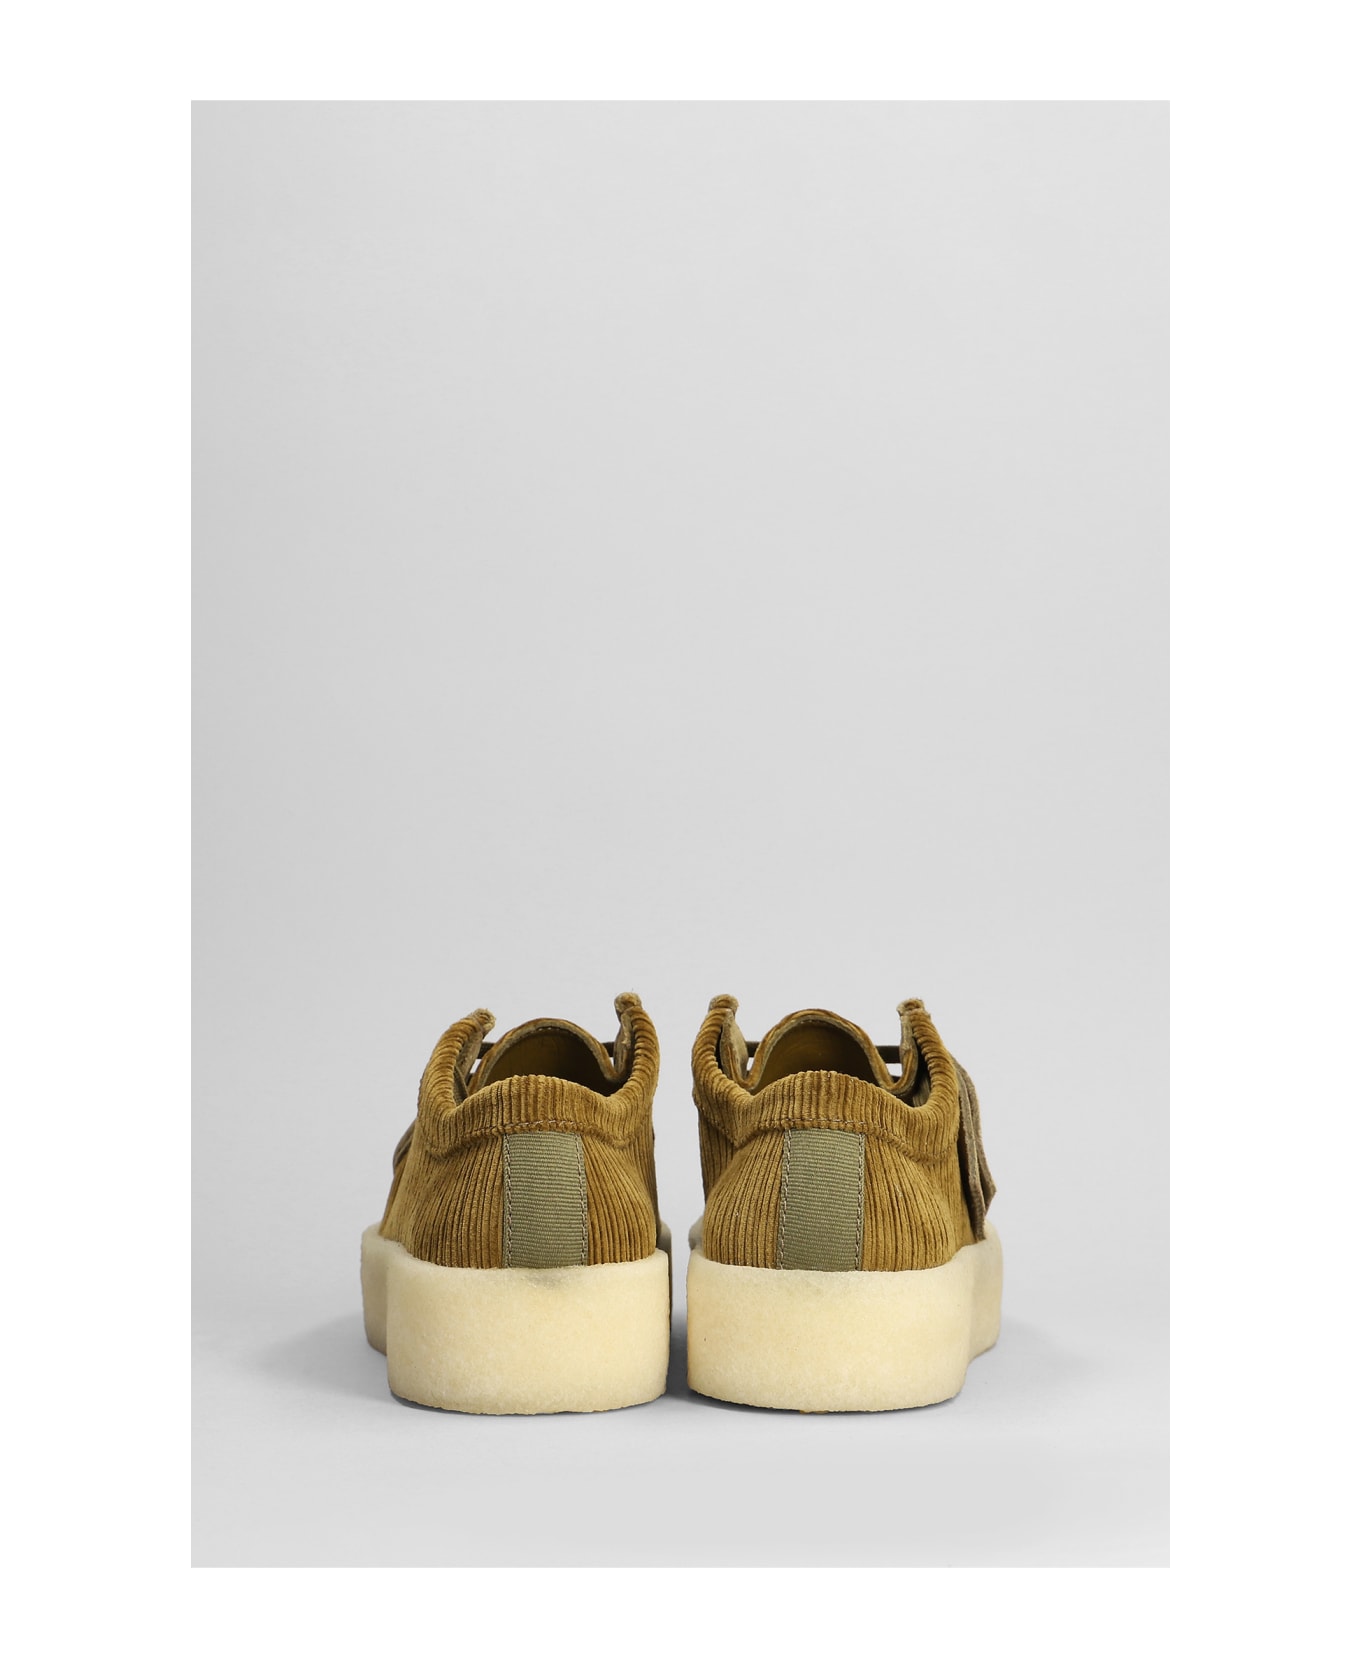 Clarks Wallabee Cup Lace Up Shoes In Leather Color Velvet - leather color